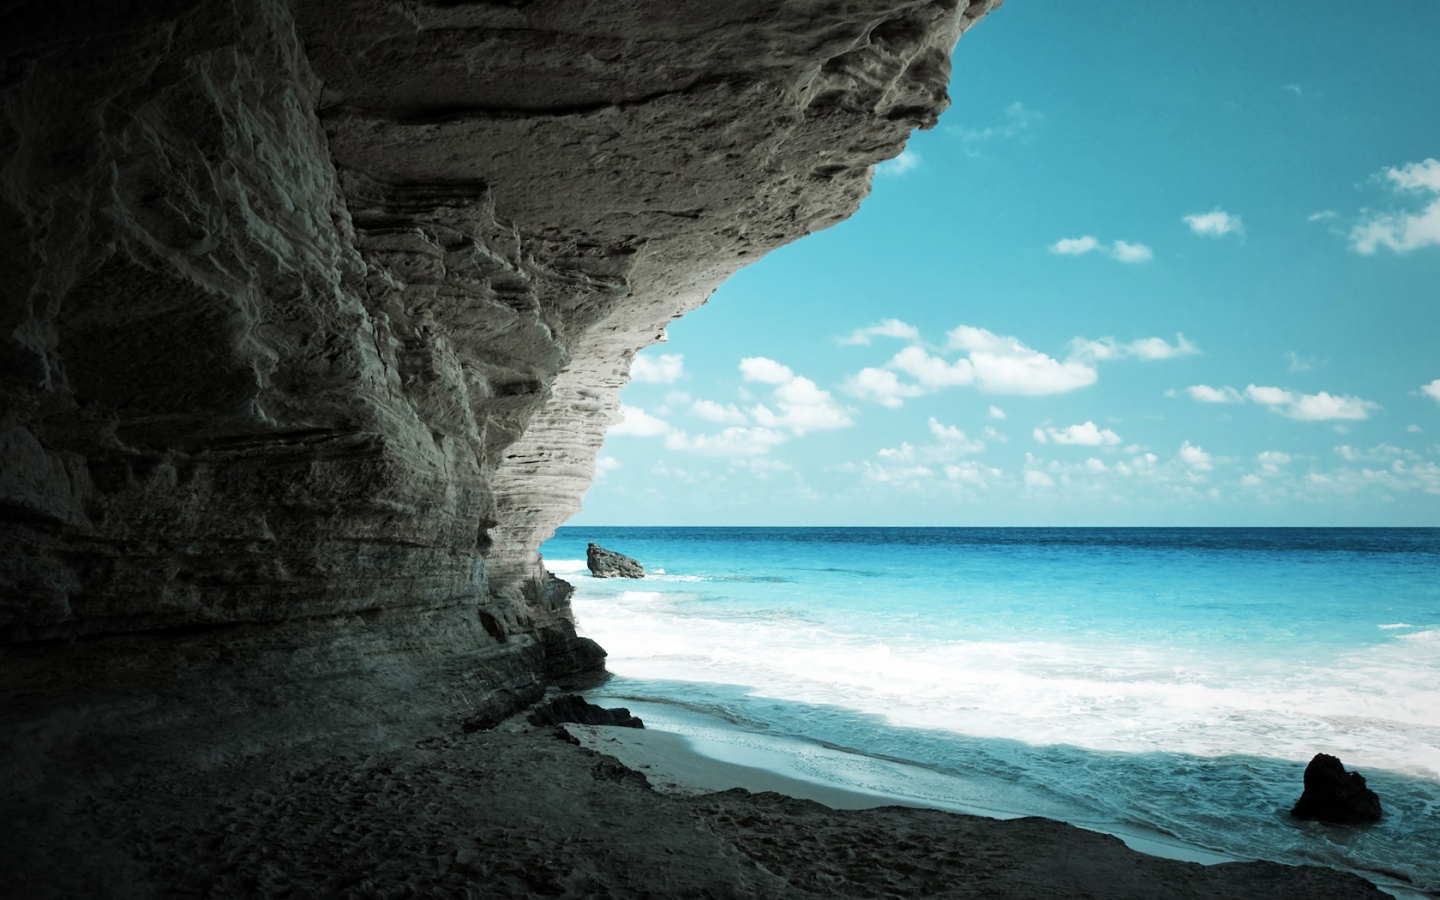 Beach cave with blue water and sky